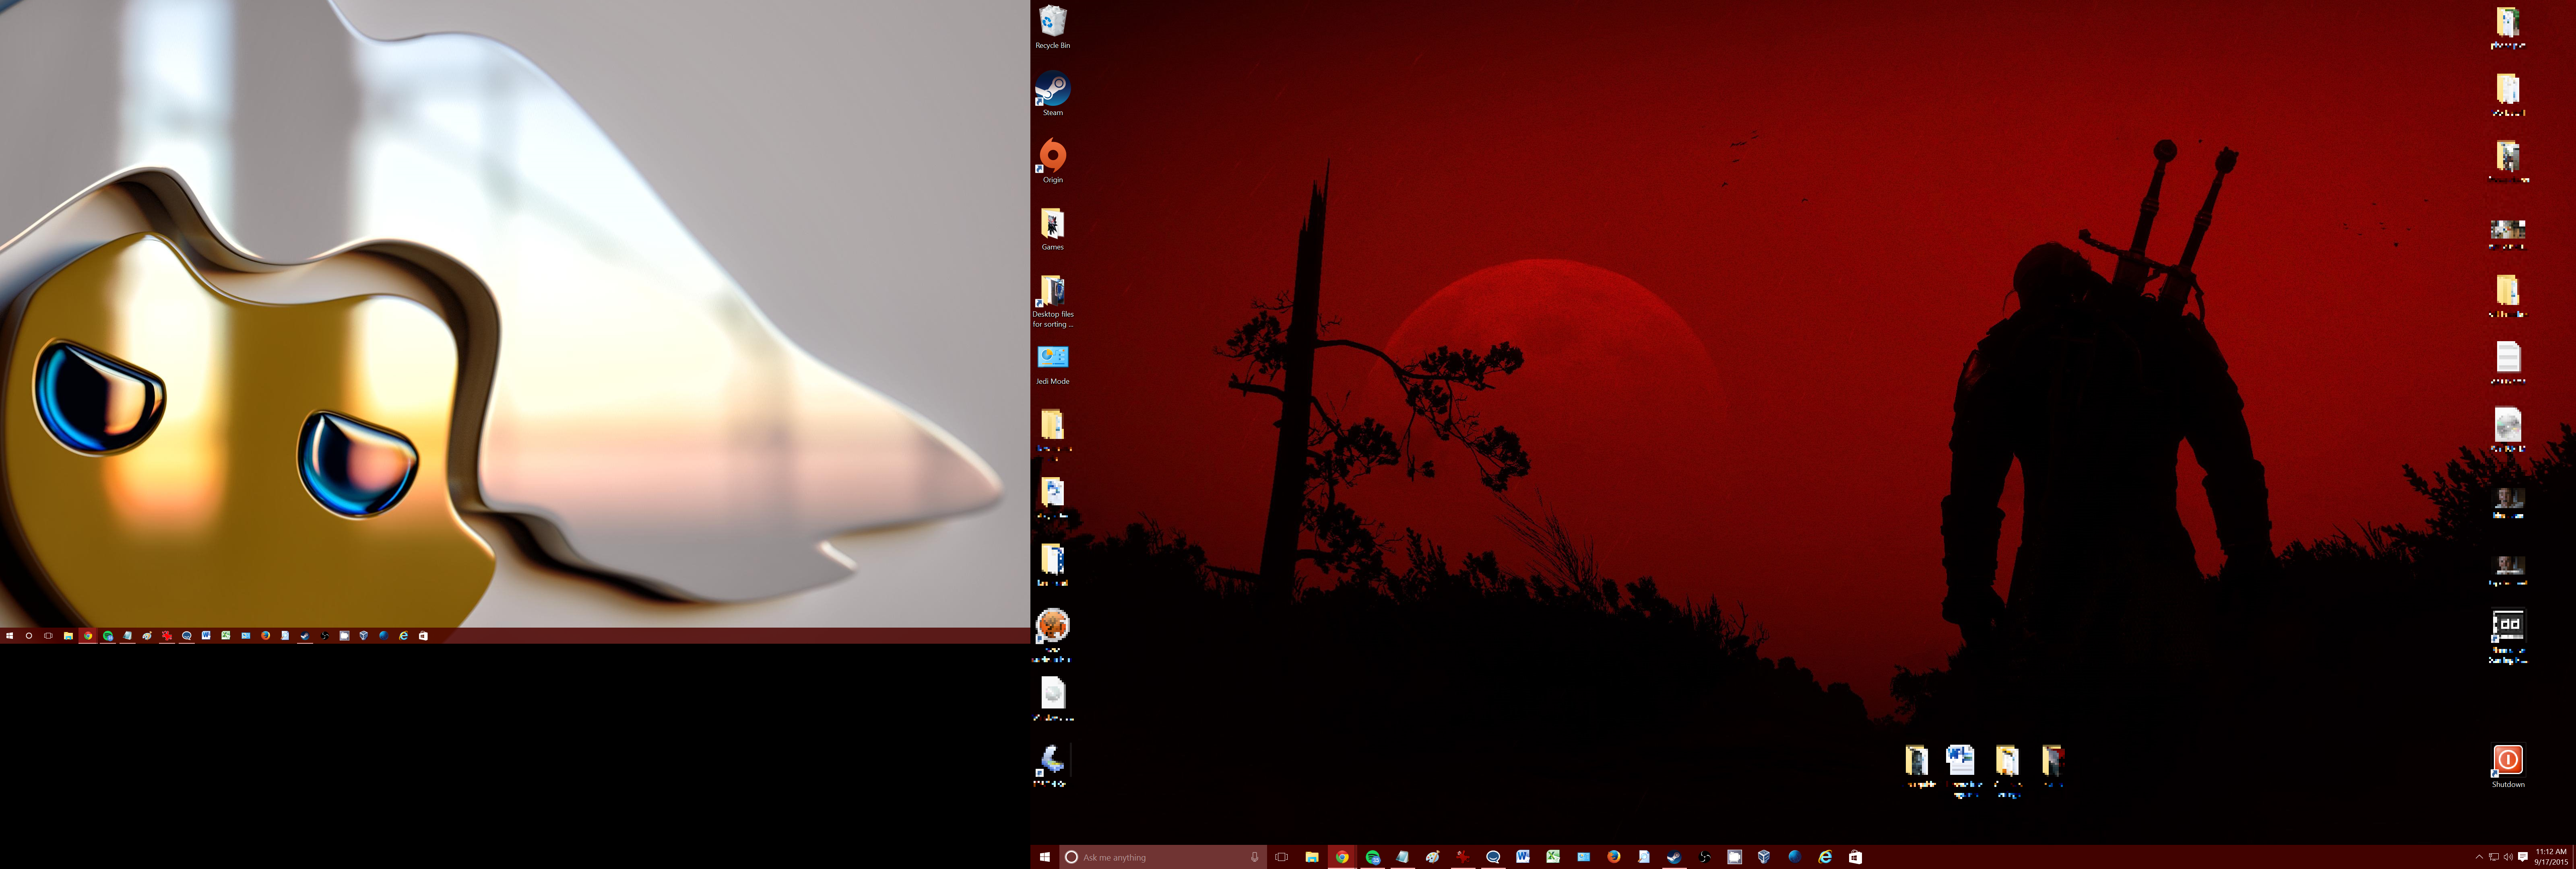 How to set different wallpapers for multiple monitors in Windows